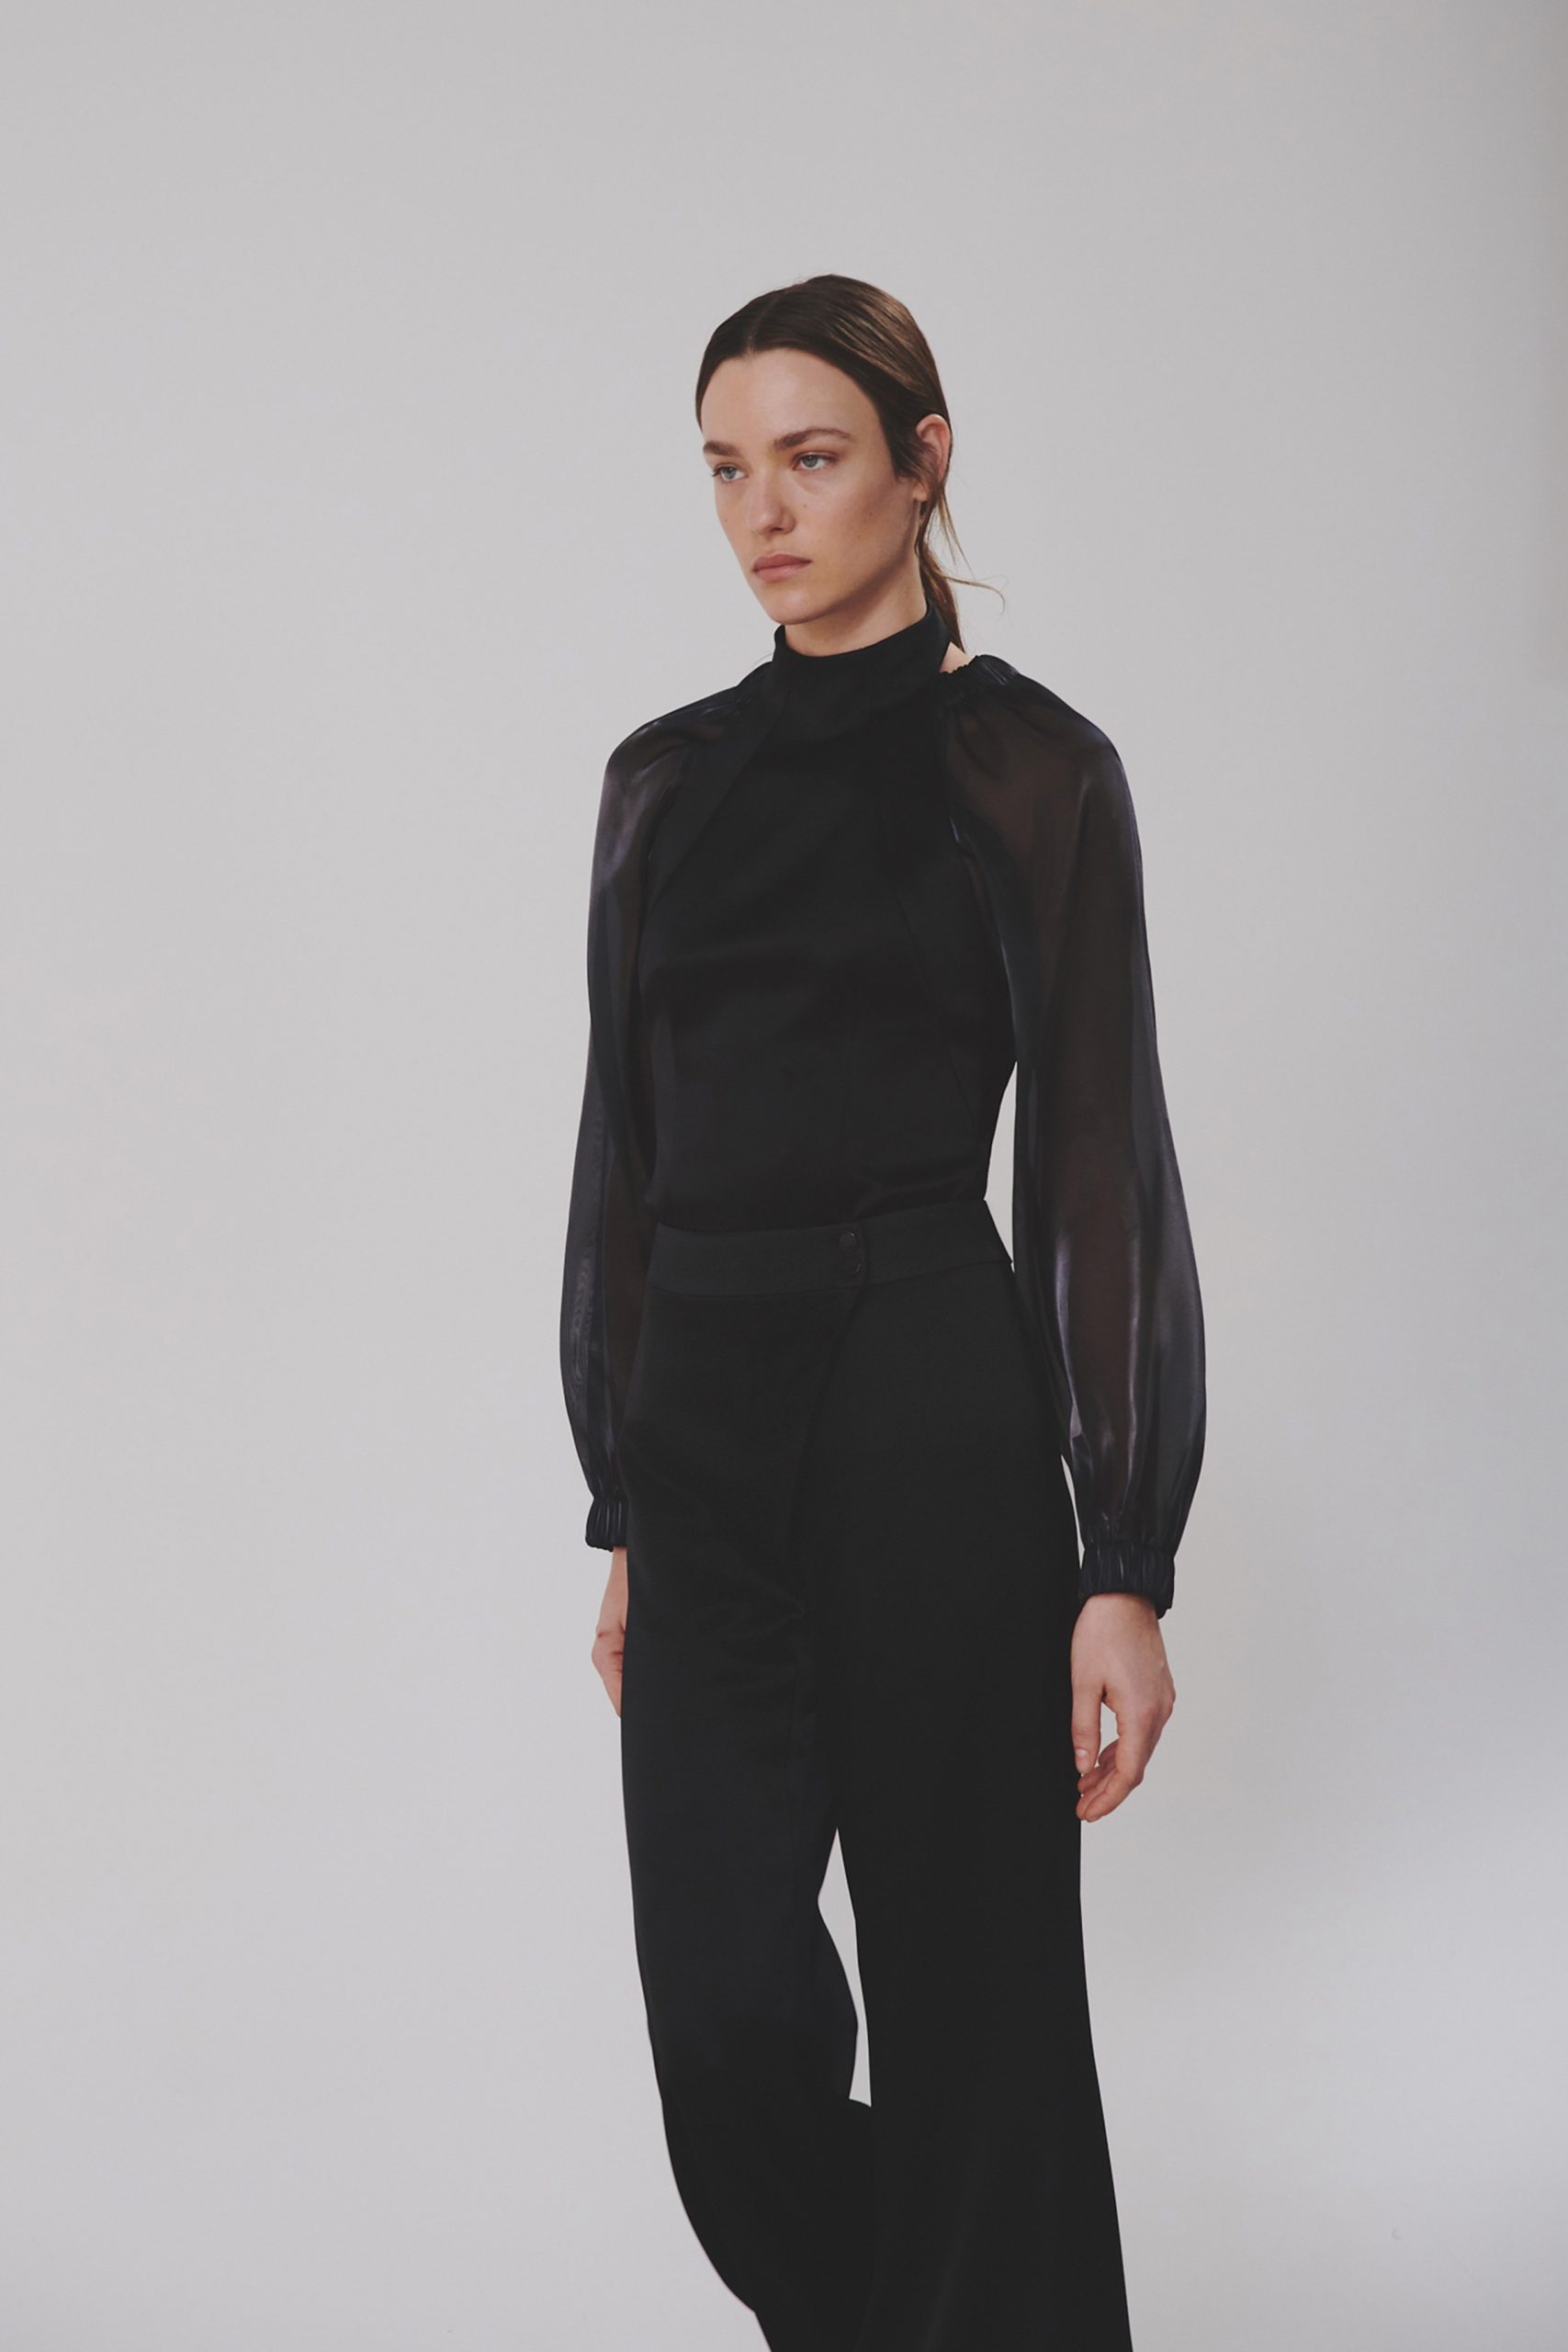 GET A CLOSER LOOK AT THE GALVAN PRE FALL 2020 COLLECTION